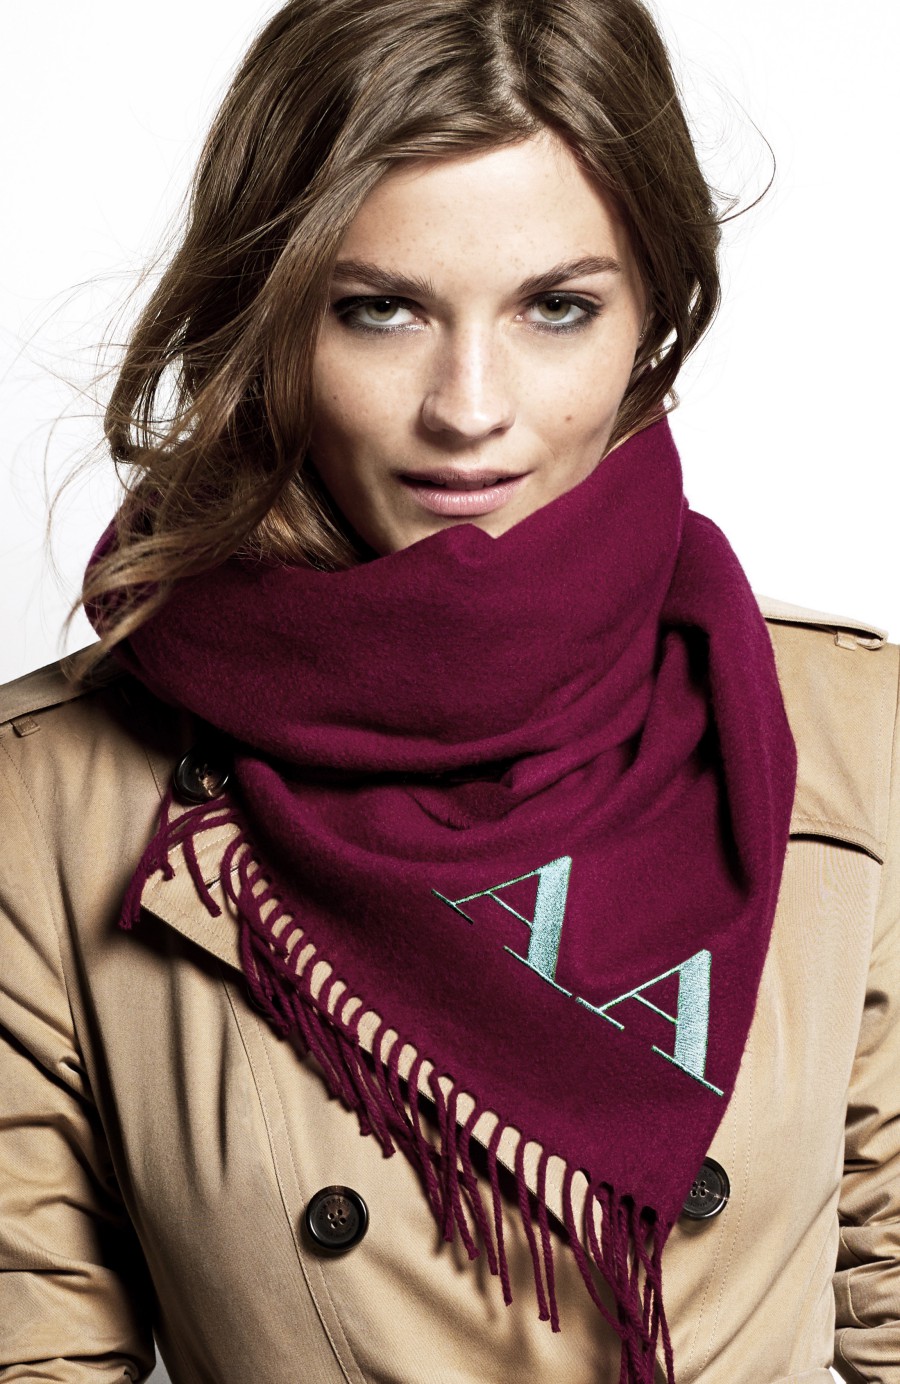 Burberry_Scarf_Styling_-_The_Bandana_featuring_Amber_Anderson.jpg